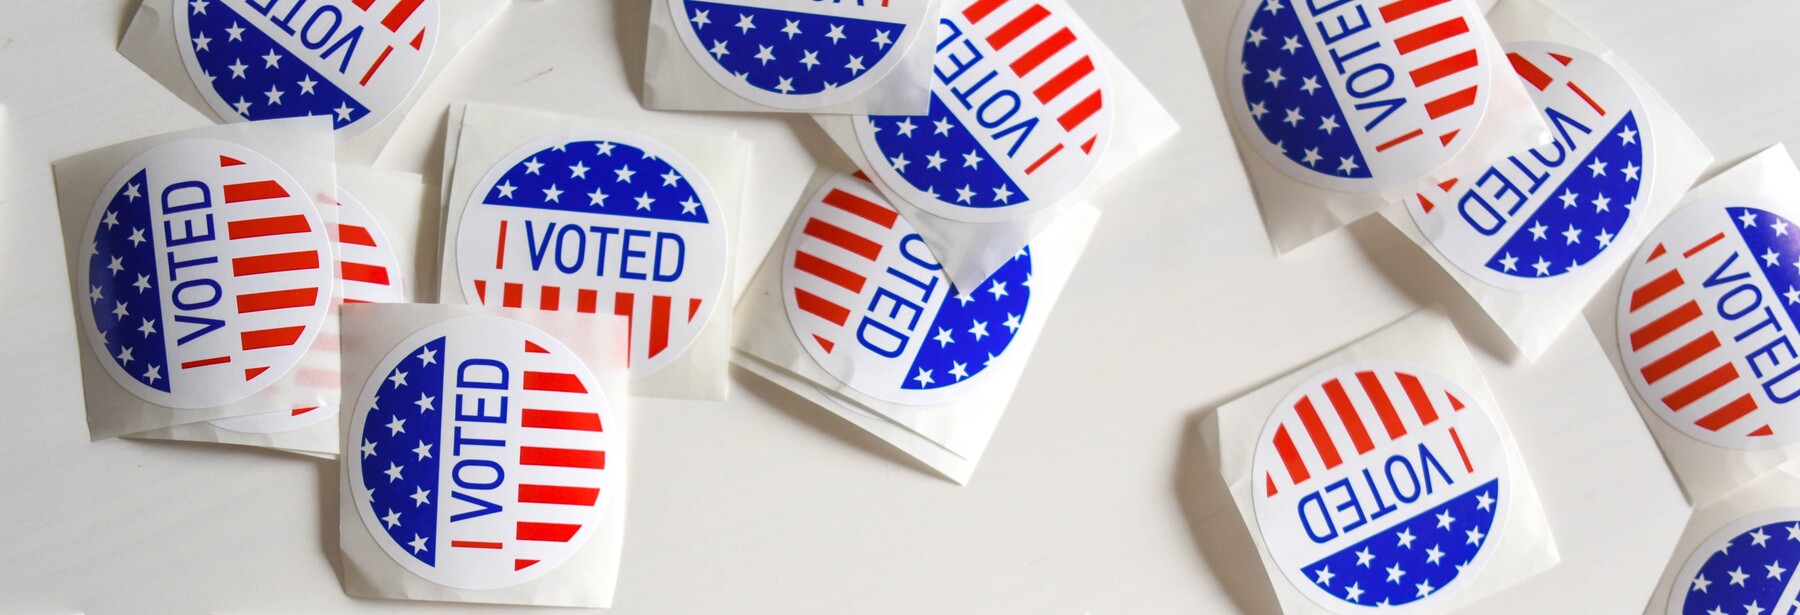 Image of "I Voted" stickers on a white background